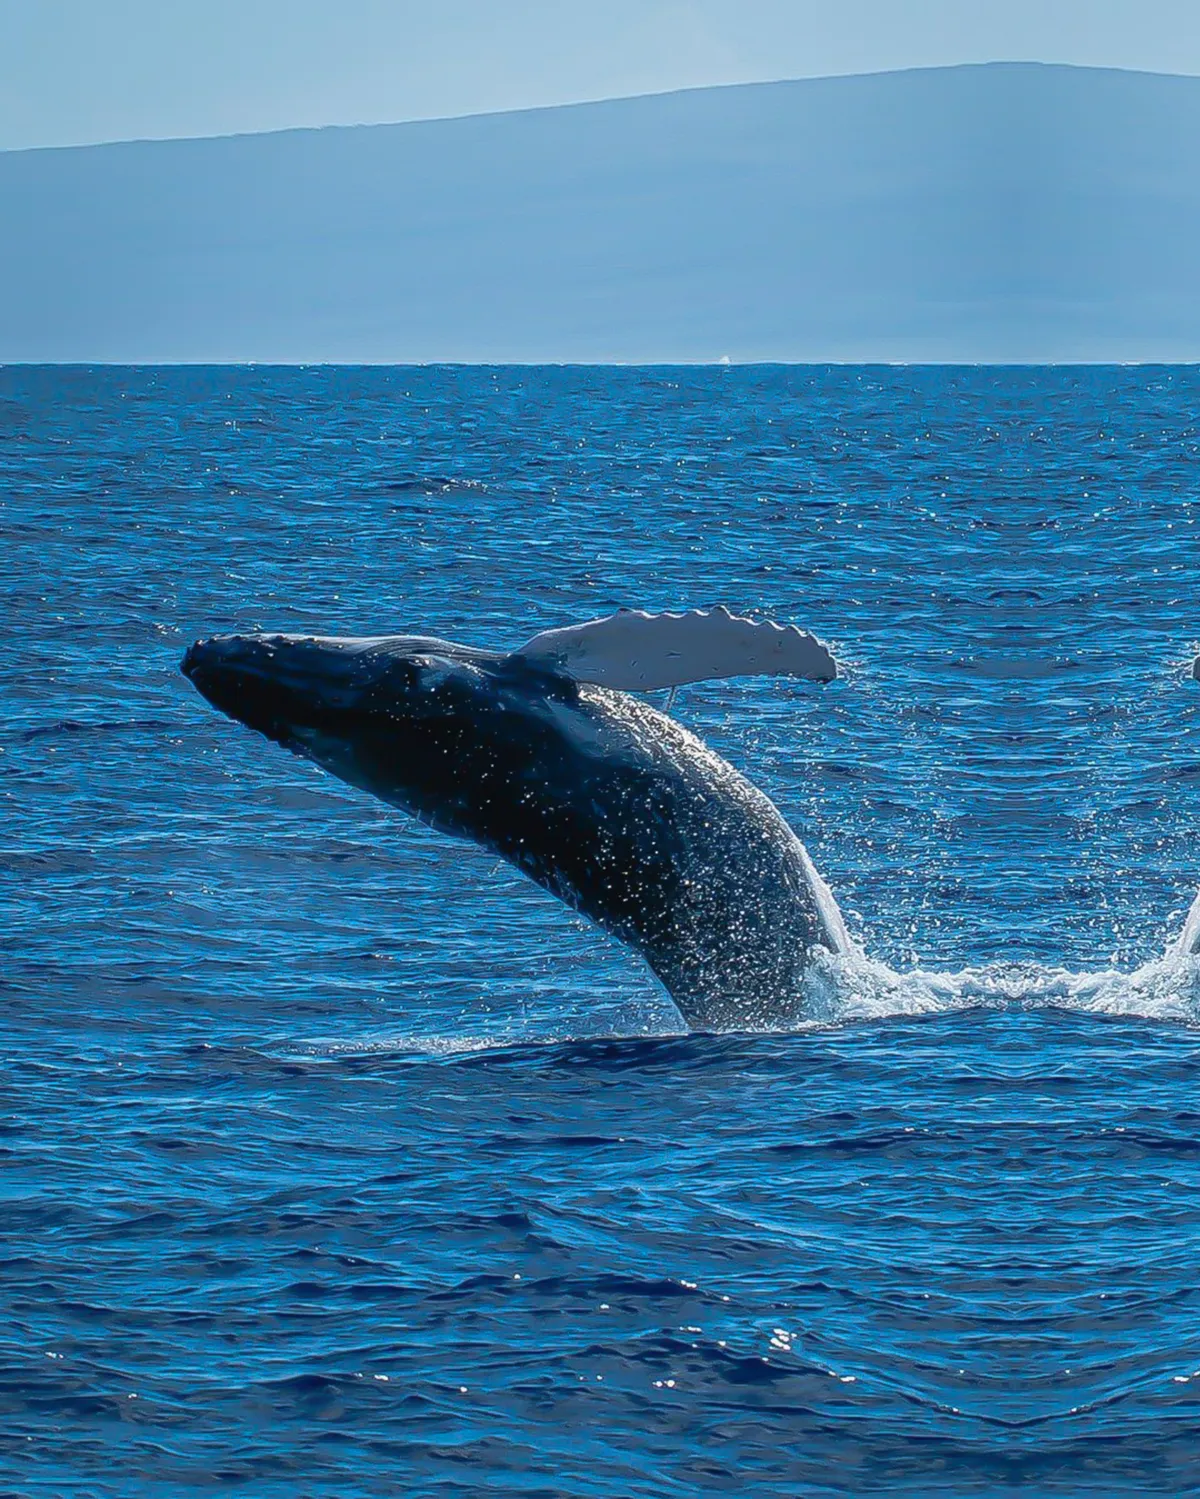 Blue whale jumping in water, Getty